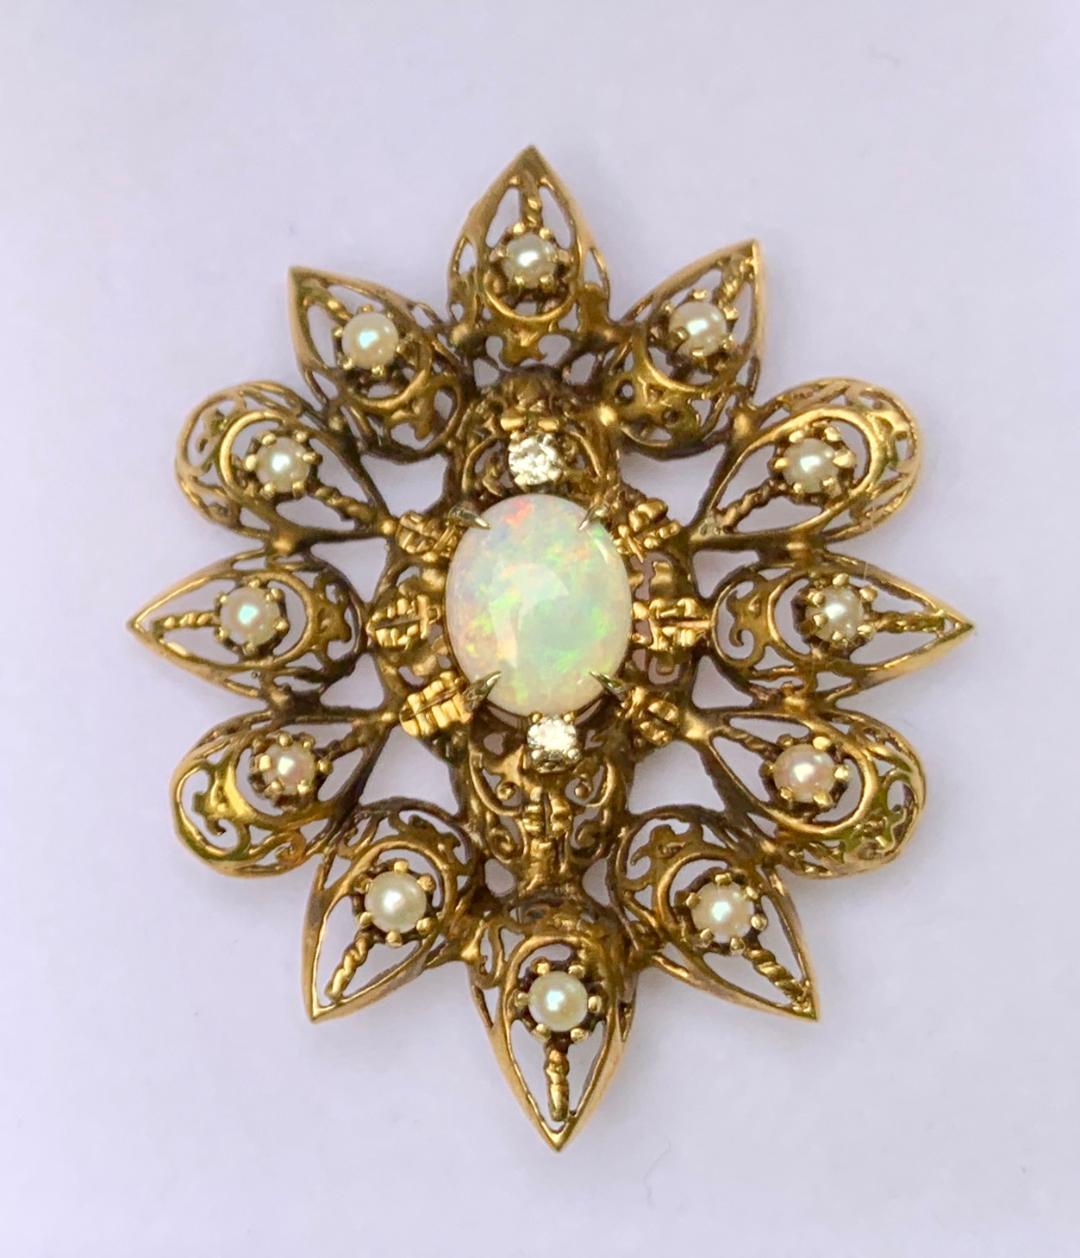 Exquisite, antique estate, late Victorian, hand made fanciful filagree openwork opal, diamond and pearl brooch pendant is an elaborately detailed oval starburst-type shape and is constructed out of 14 karat yellow gold which has a natural antique